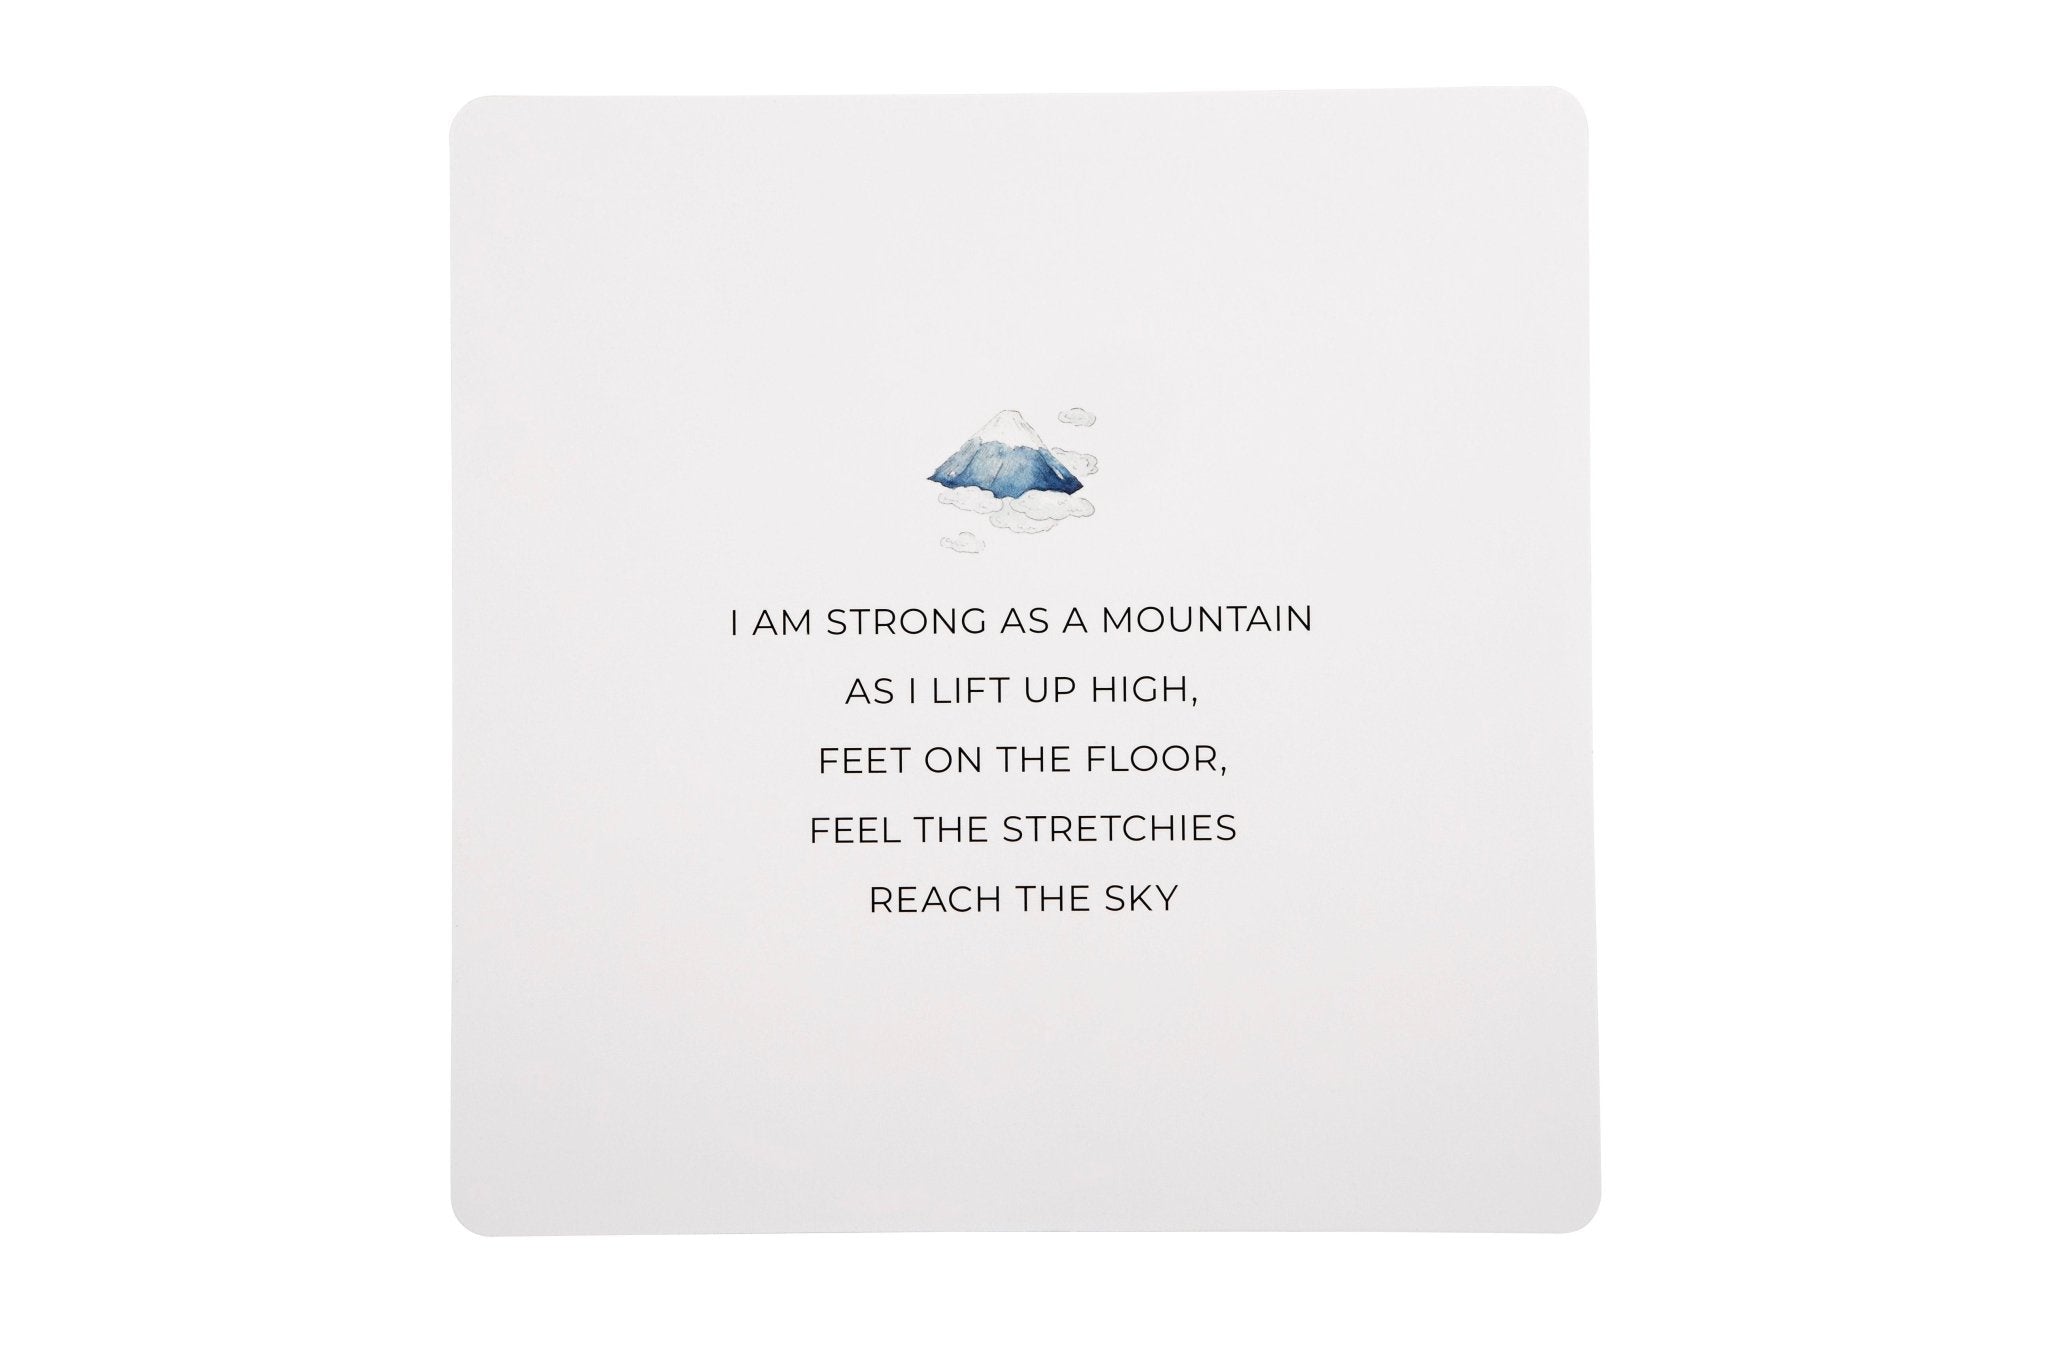 Yoga Flash Cards - THE SUS&TAIN STORE